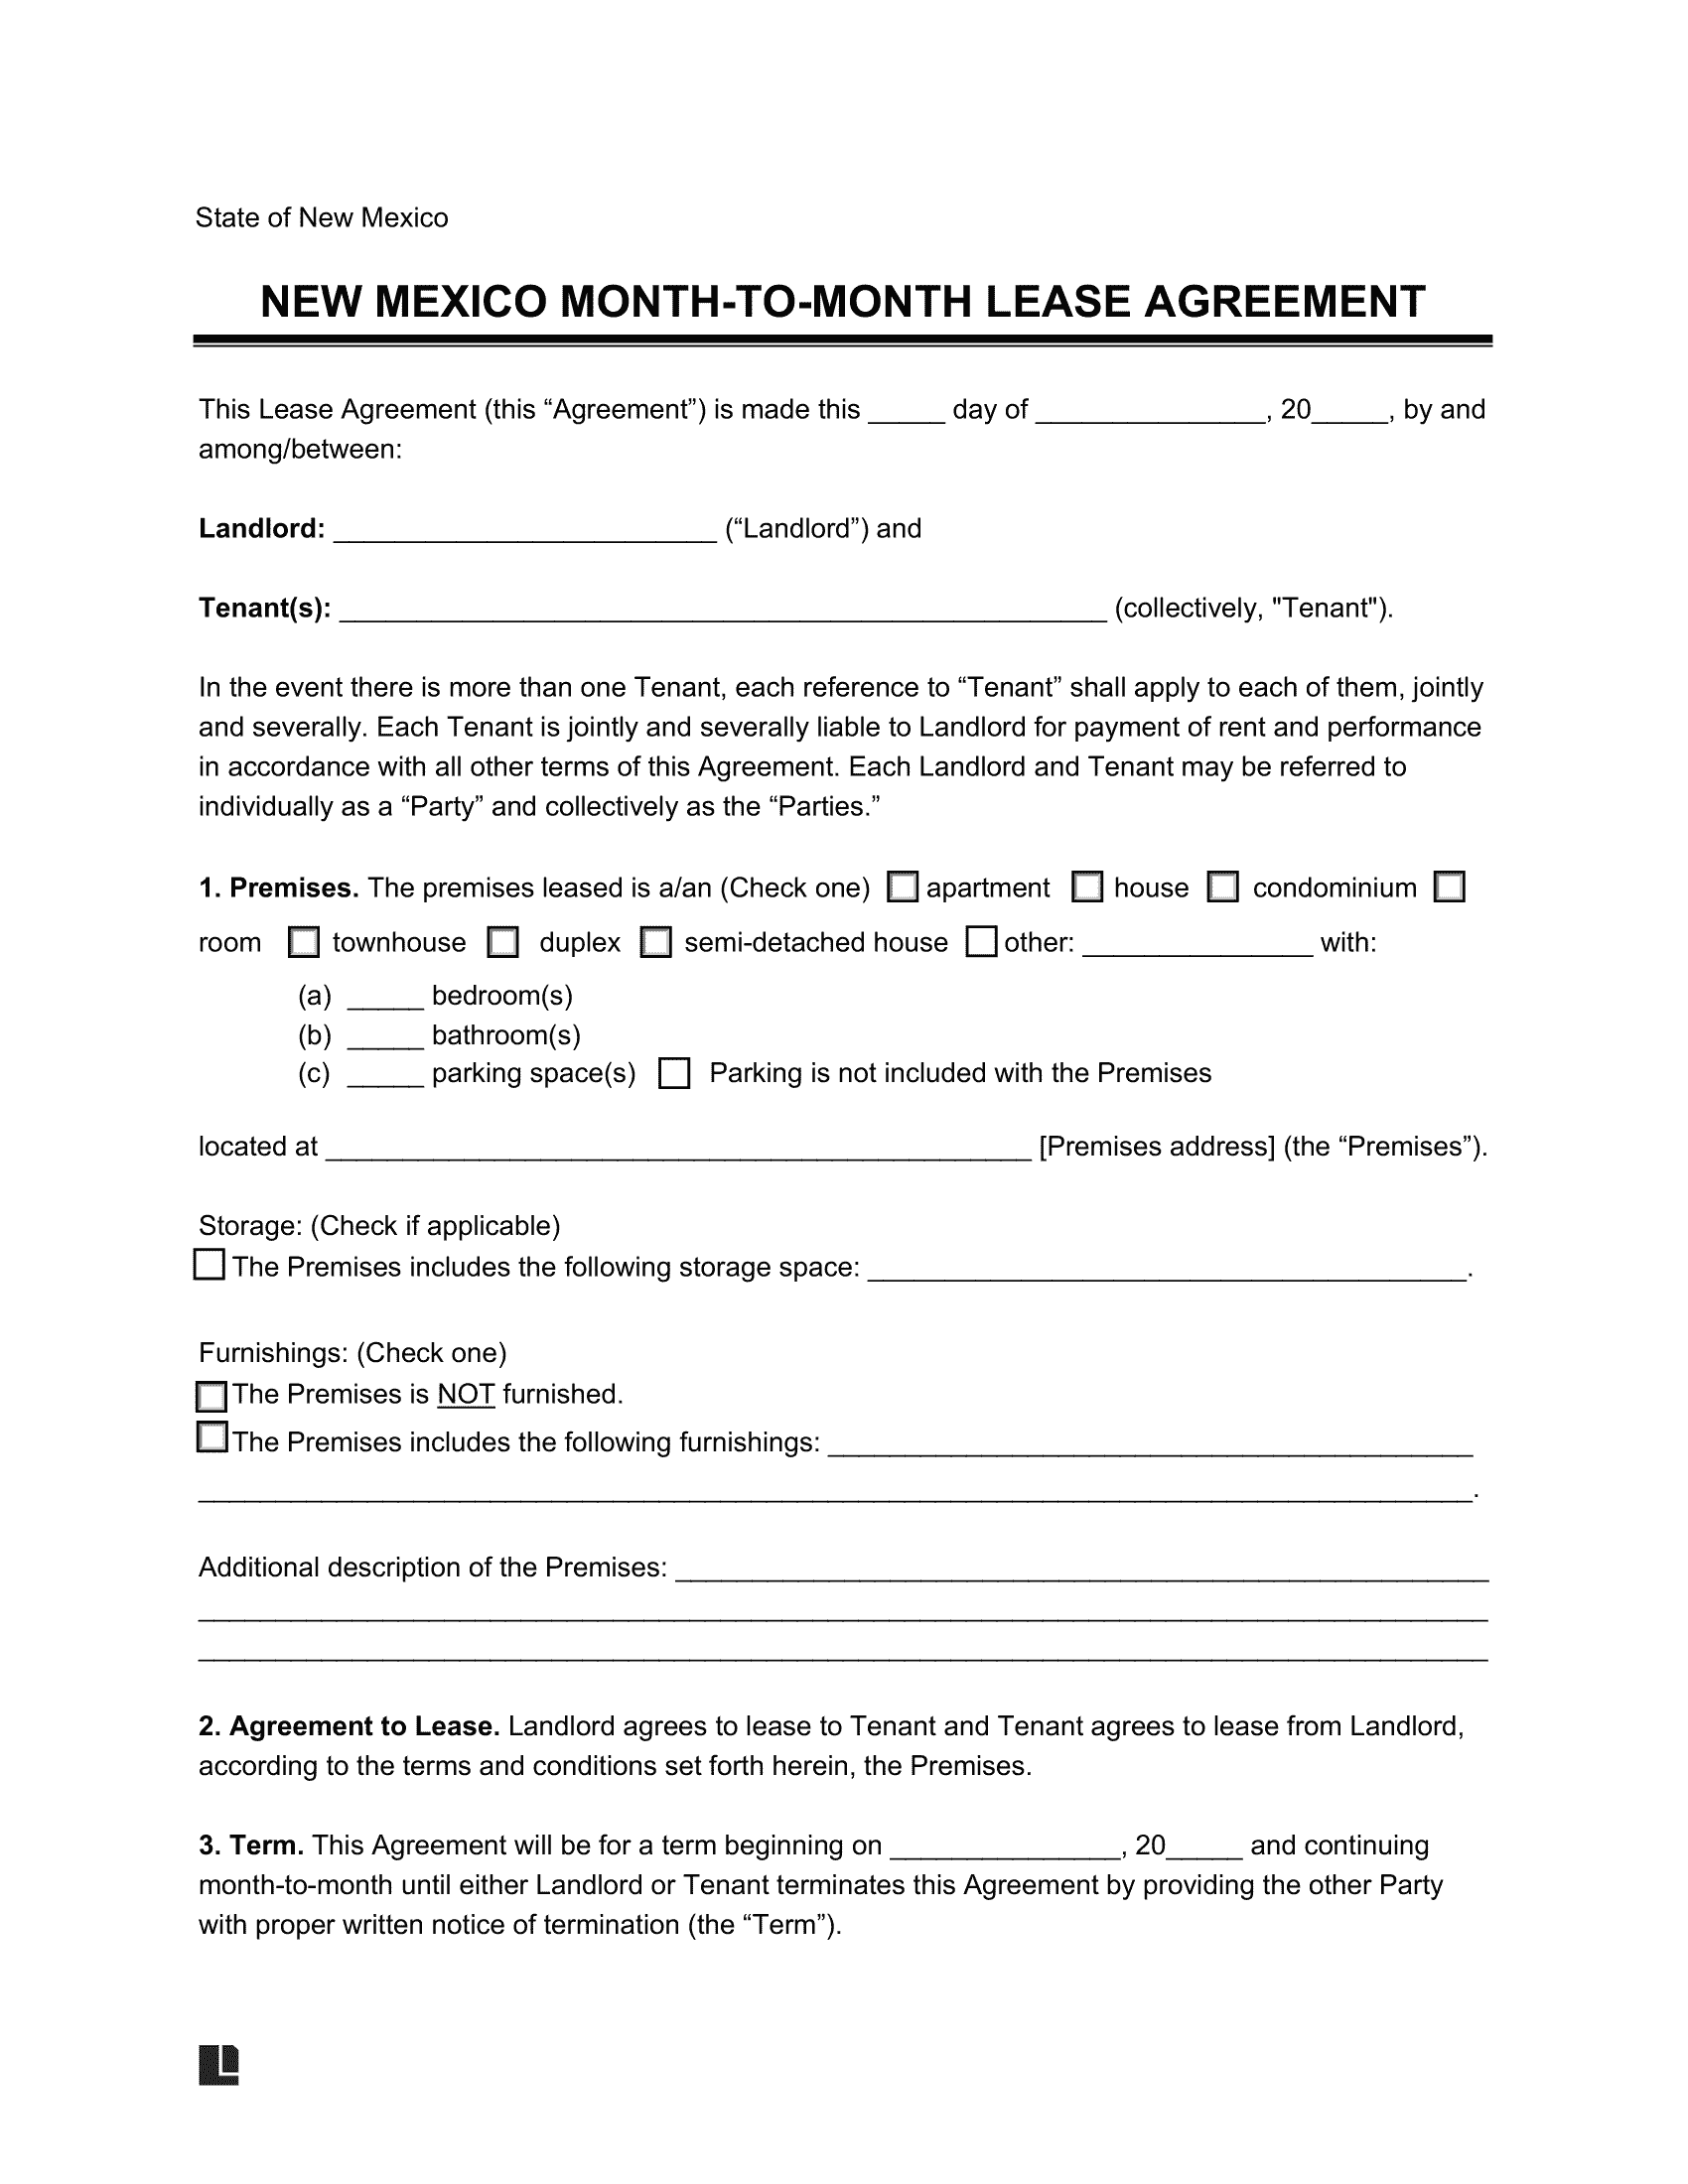 New Mexico Month-to-Month Rental Agreement